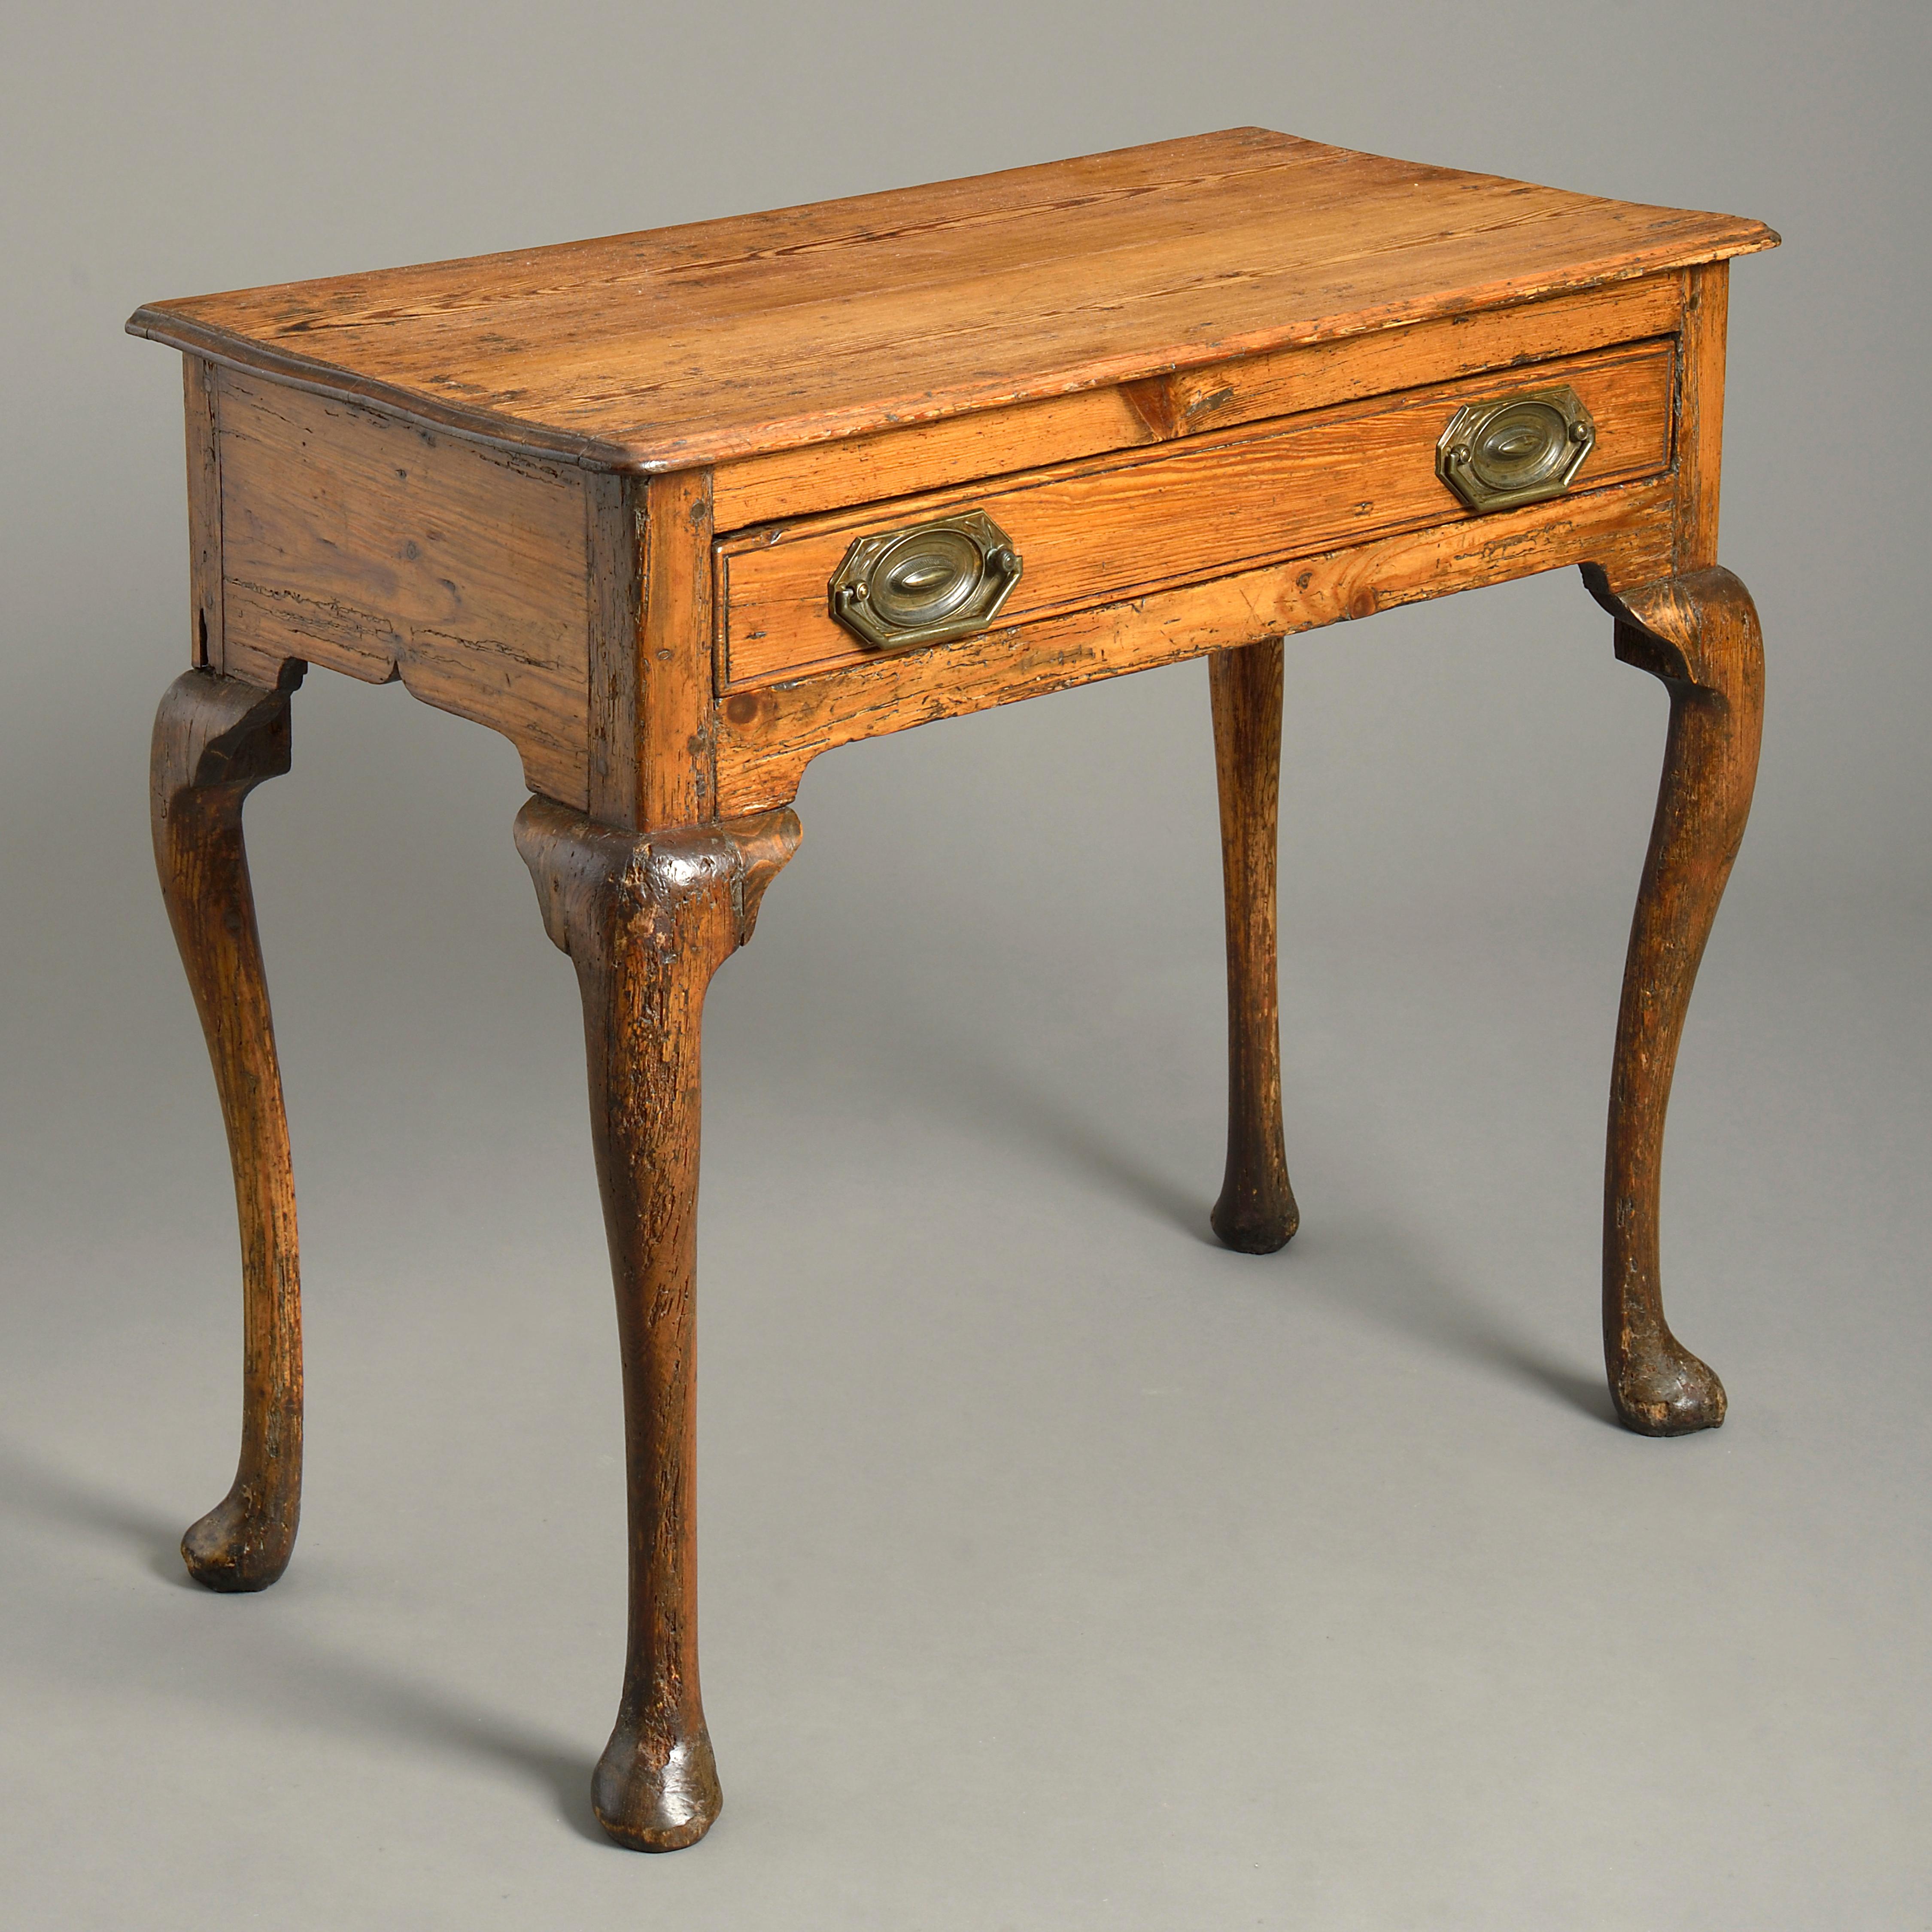 A charming mid-18th century pine side table, the overhanging top above a single drawer with Regency Period handles, all raised upon generously carved cabriole legs with pad feet.